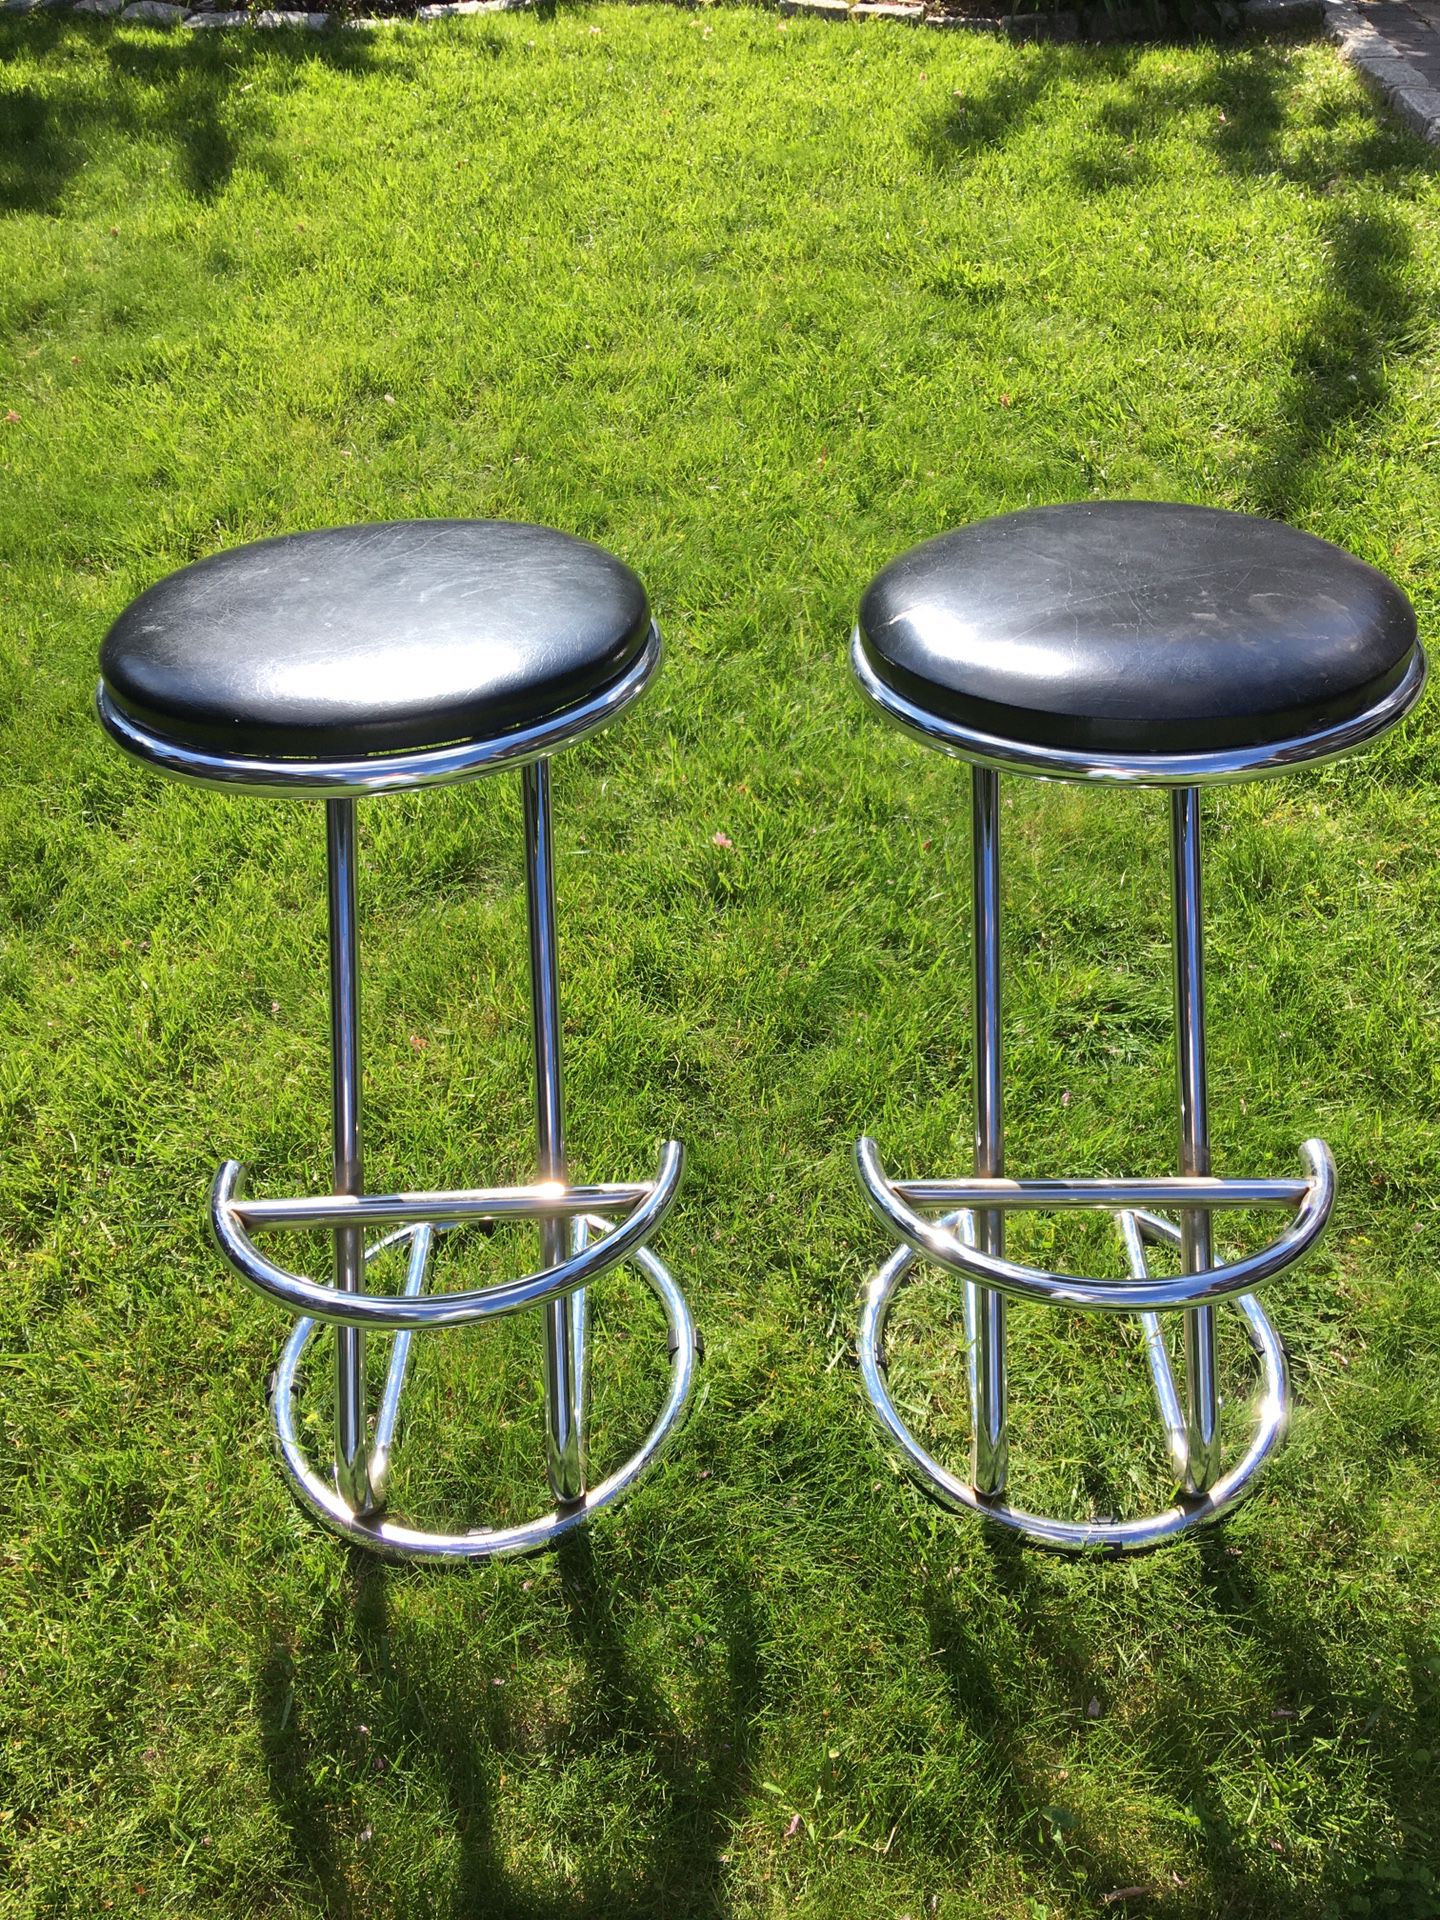 Two Vintage Chrome Bar Stools (Coaster Co of America)